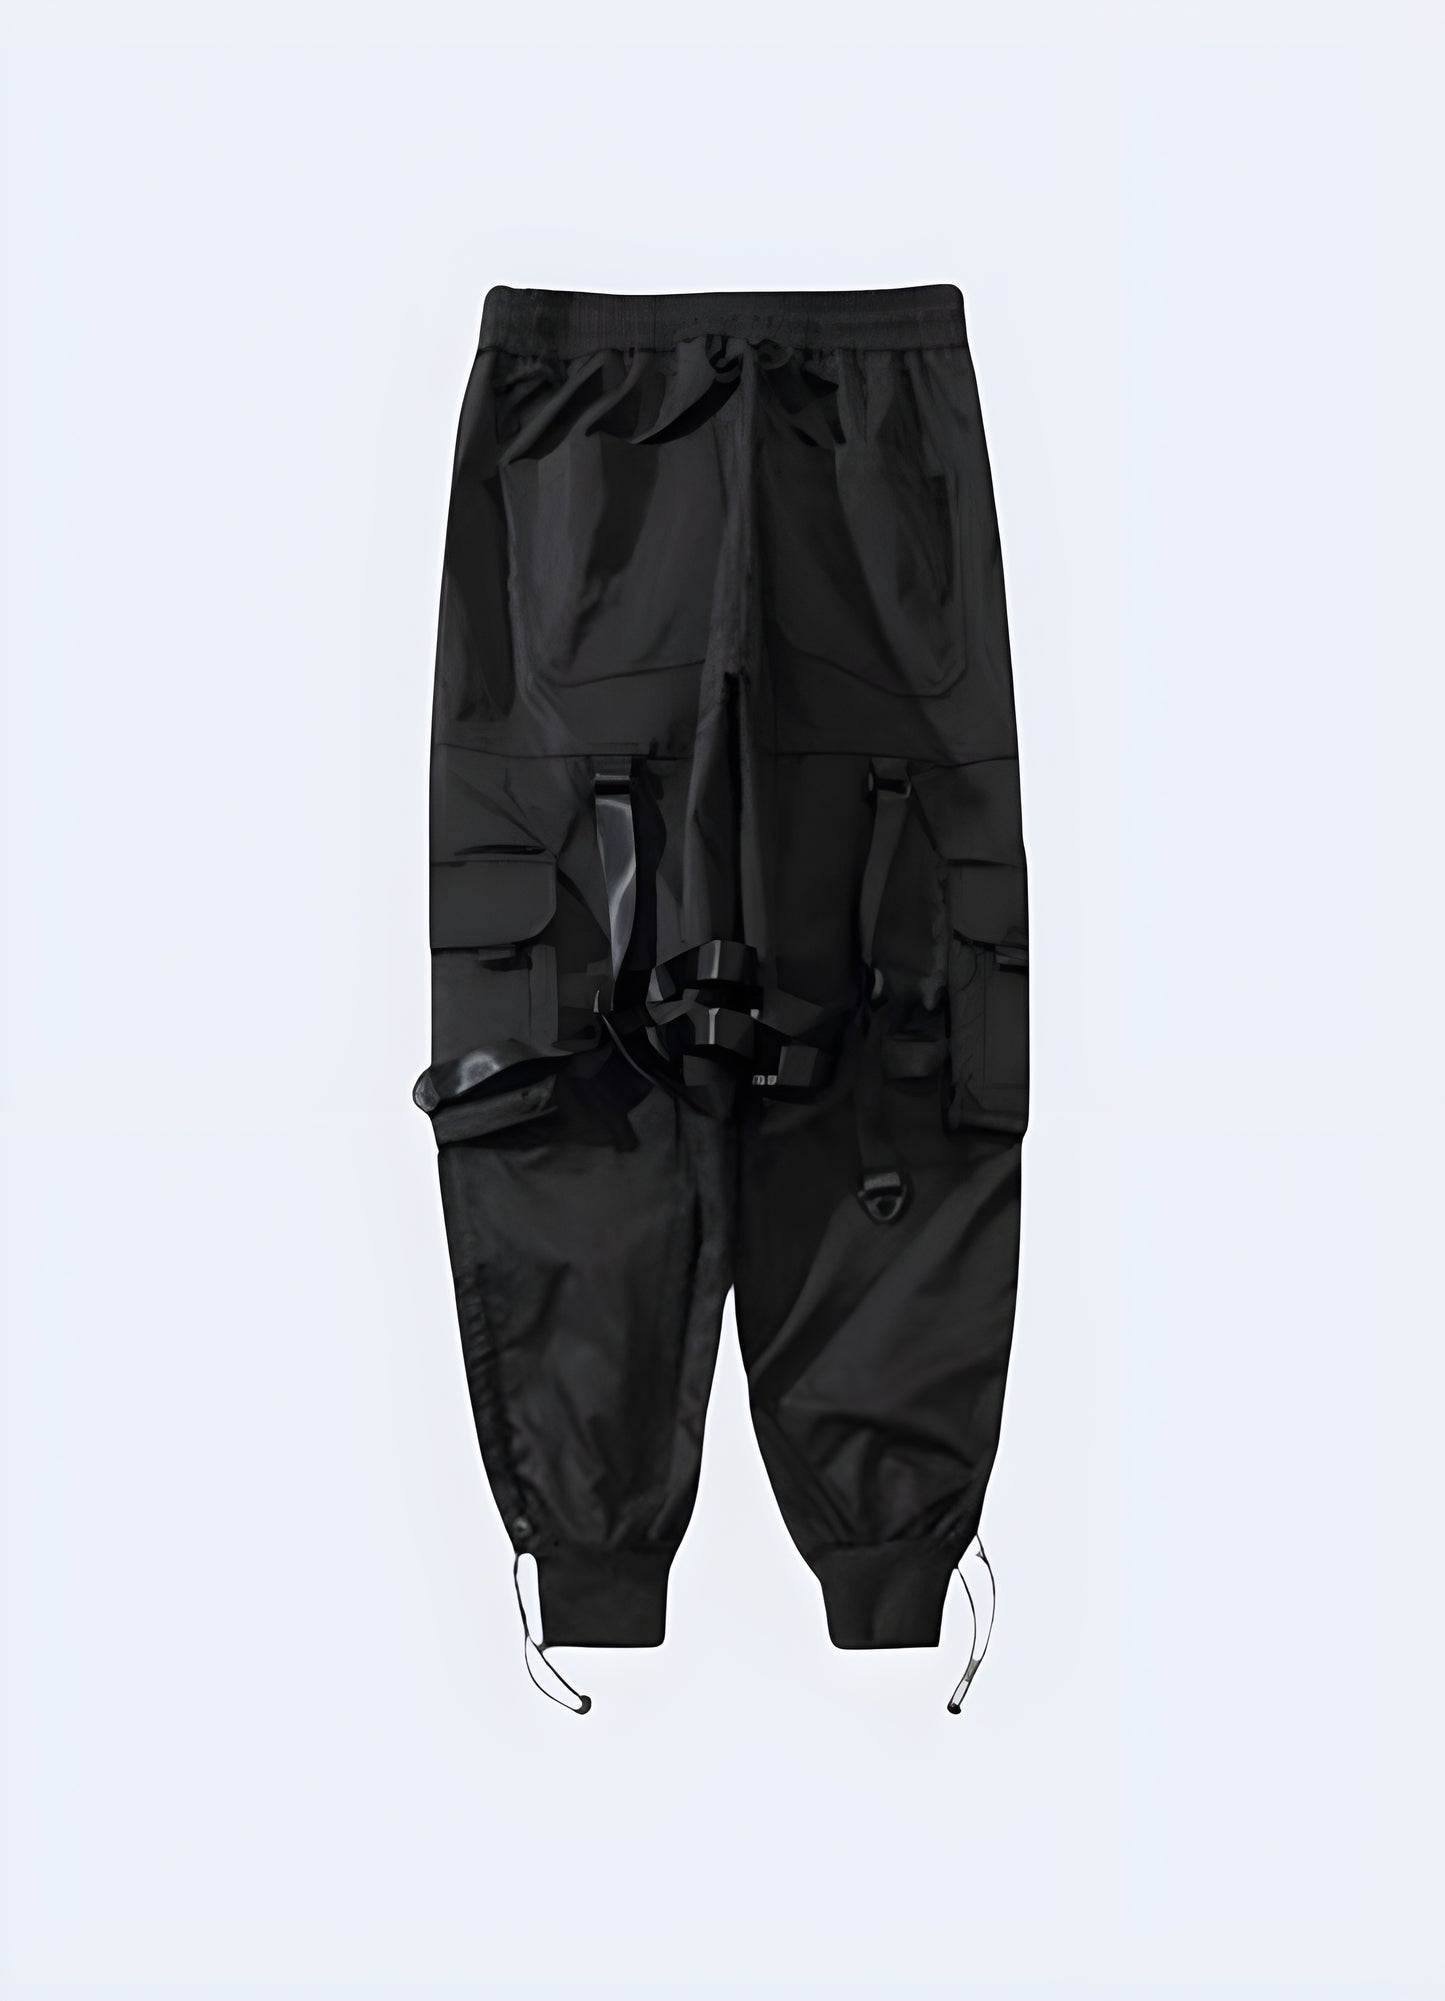 These black cargo pants are visually striking and remarkably functional.